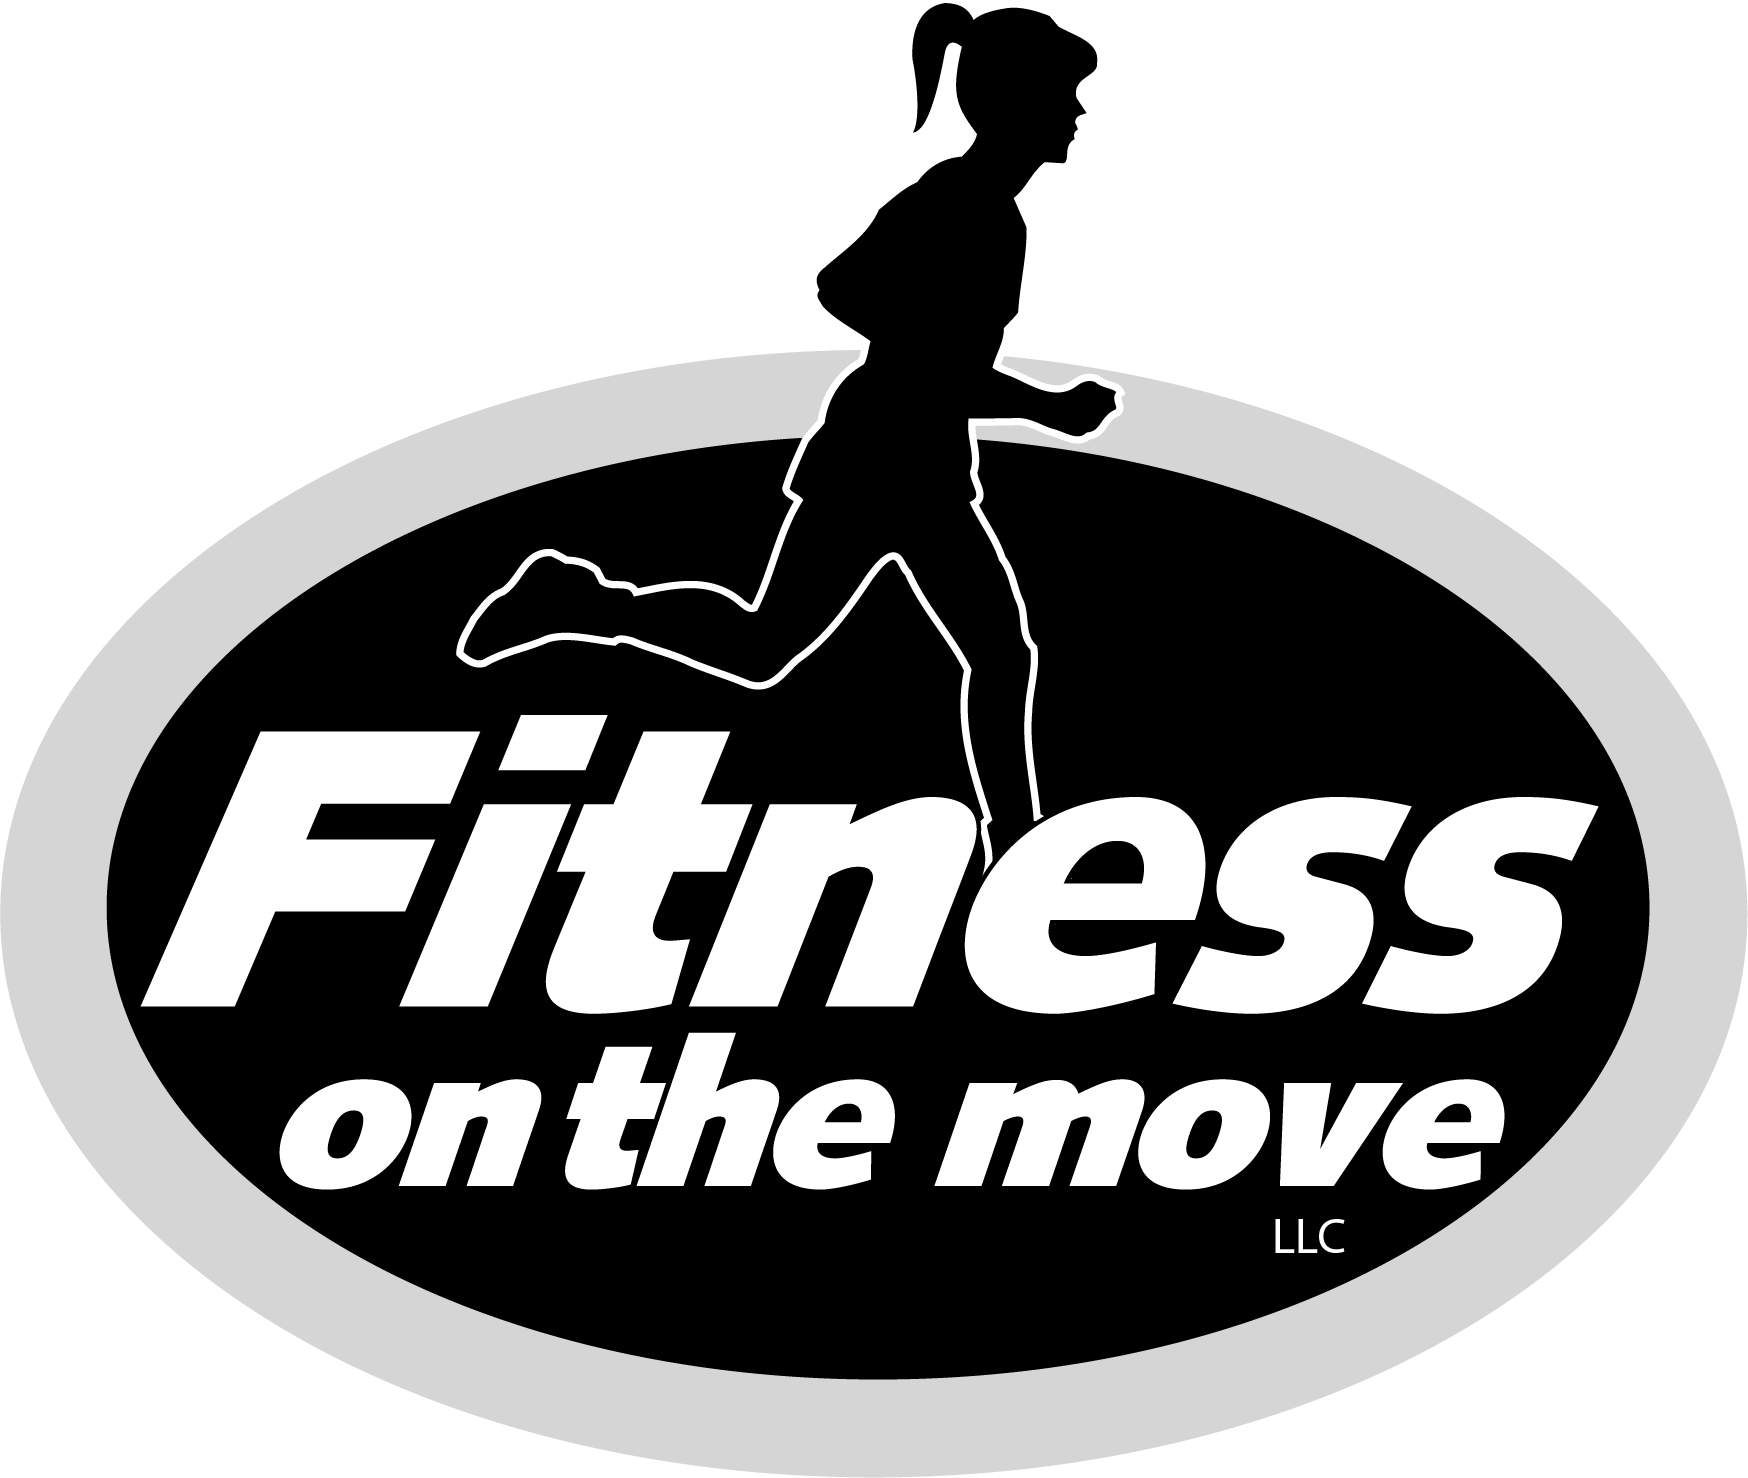 Fitness on the move